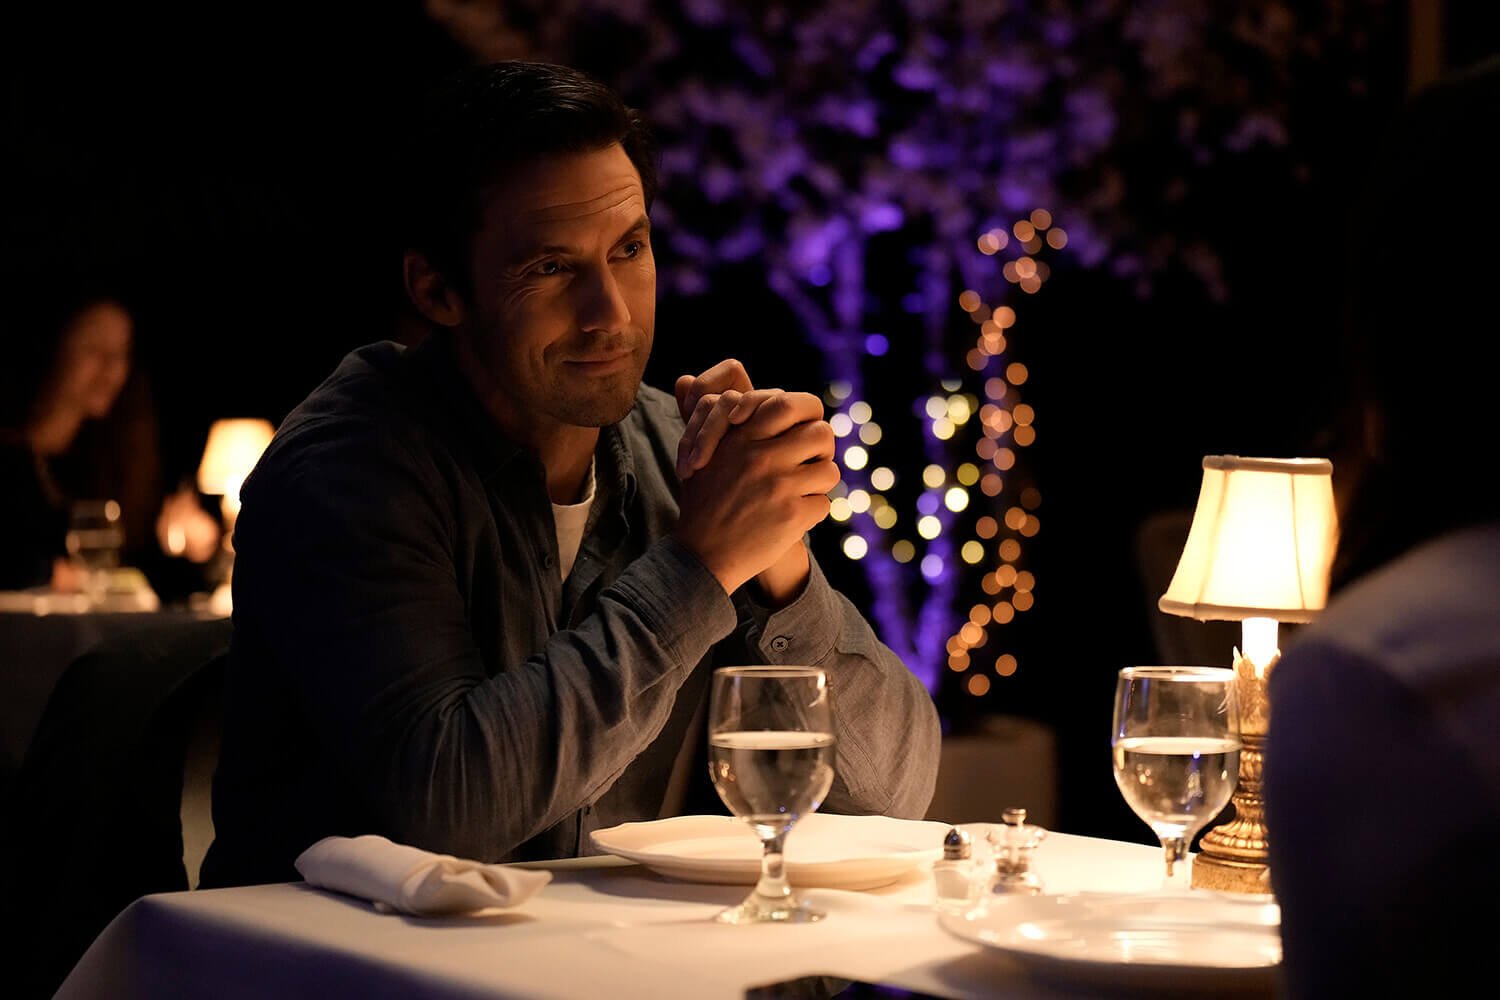 Milo Ventimiglia as Charlie sitting at a restaurant dinner table in The Company You Keep